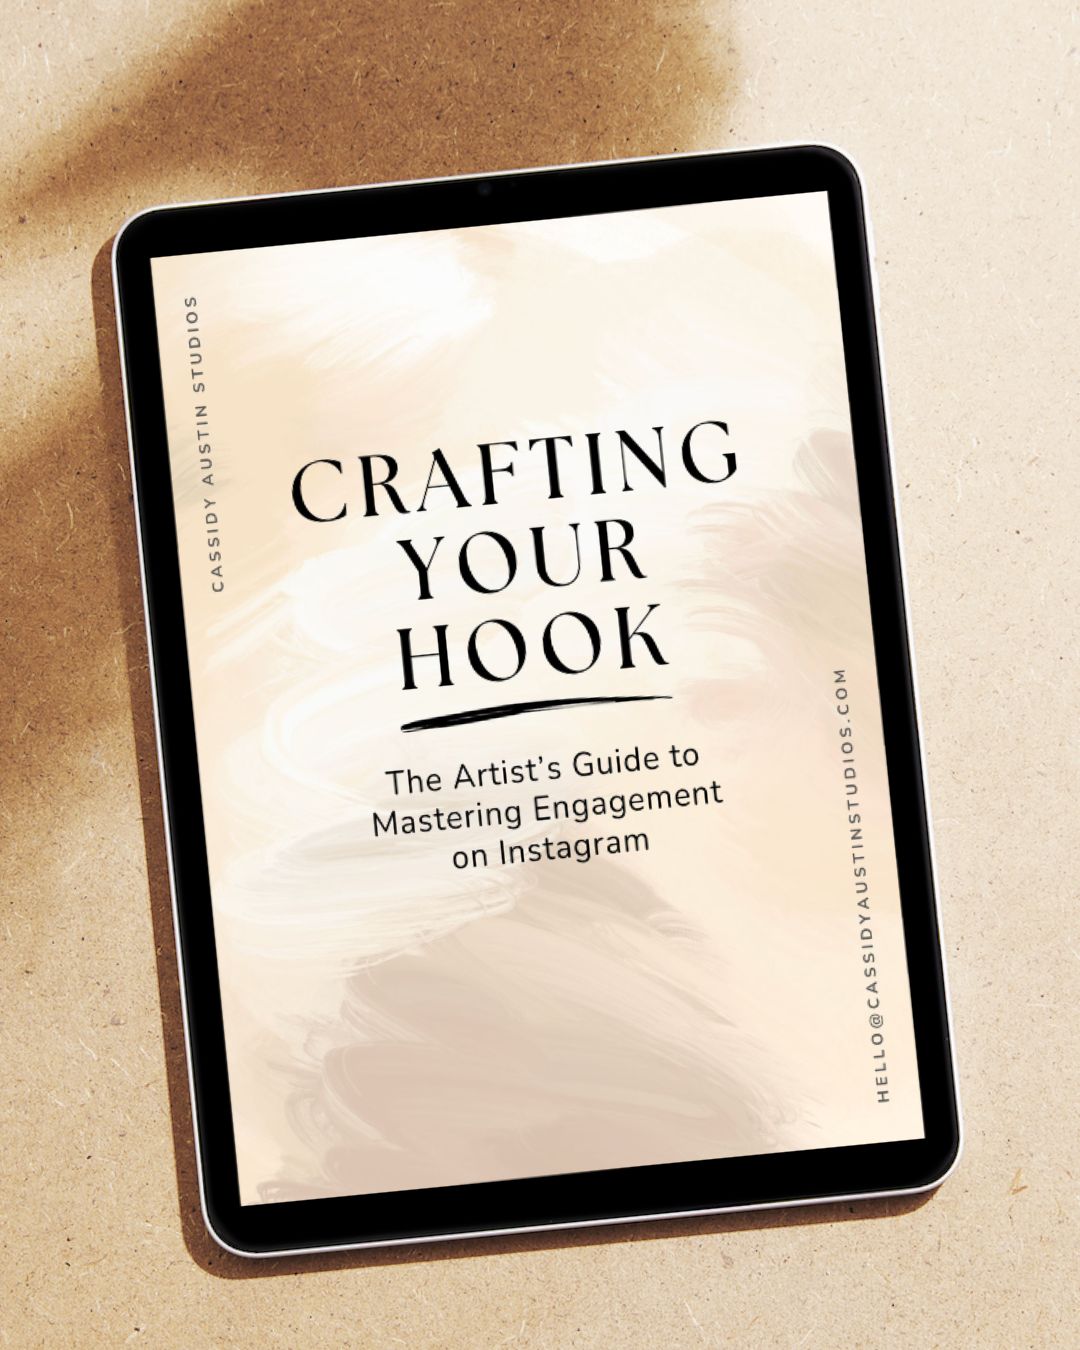 Crafting Your Hook: An Artists Guide to Mastering Engagement on Instagram